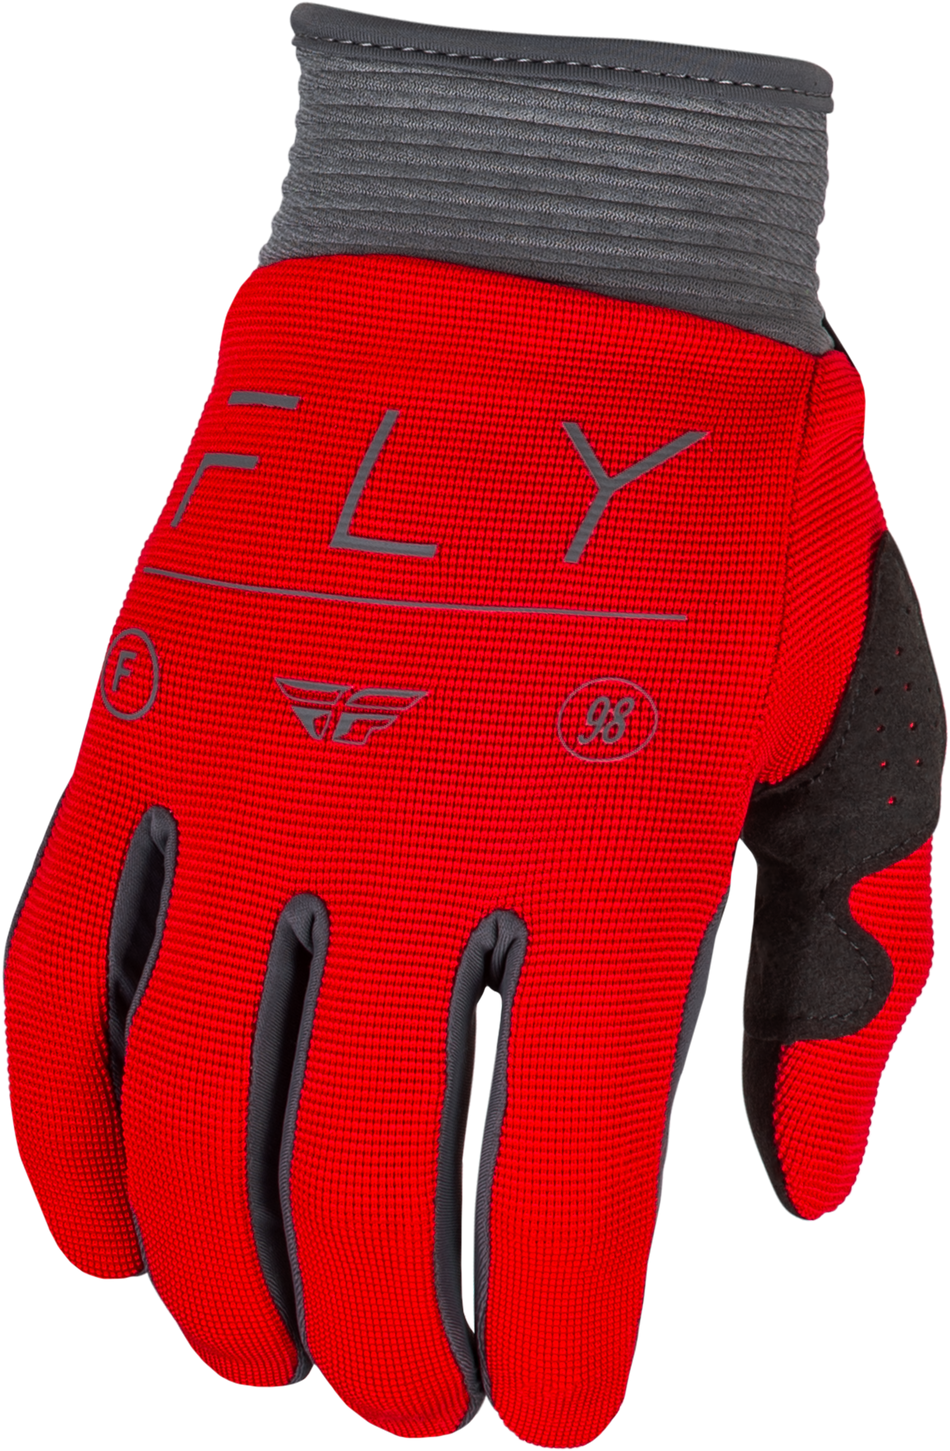 FLY RACING Youth F-16 Gloves Red/Charcoal/White Yxs 377-913YXS